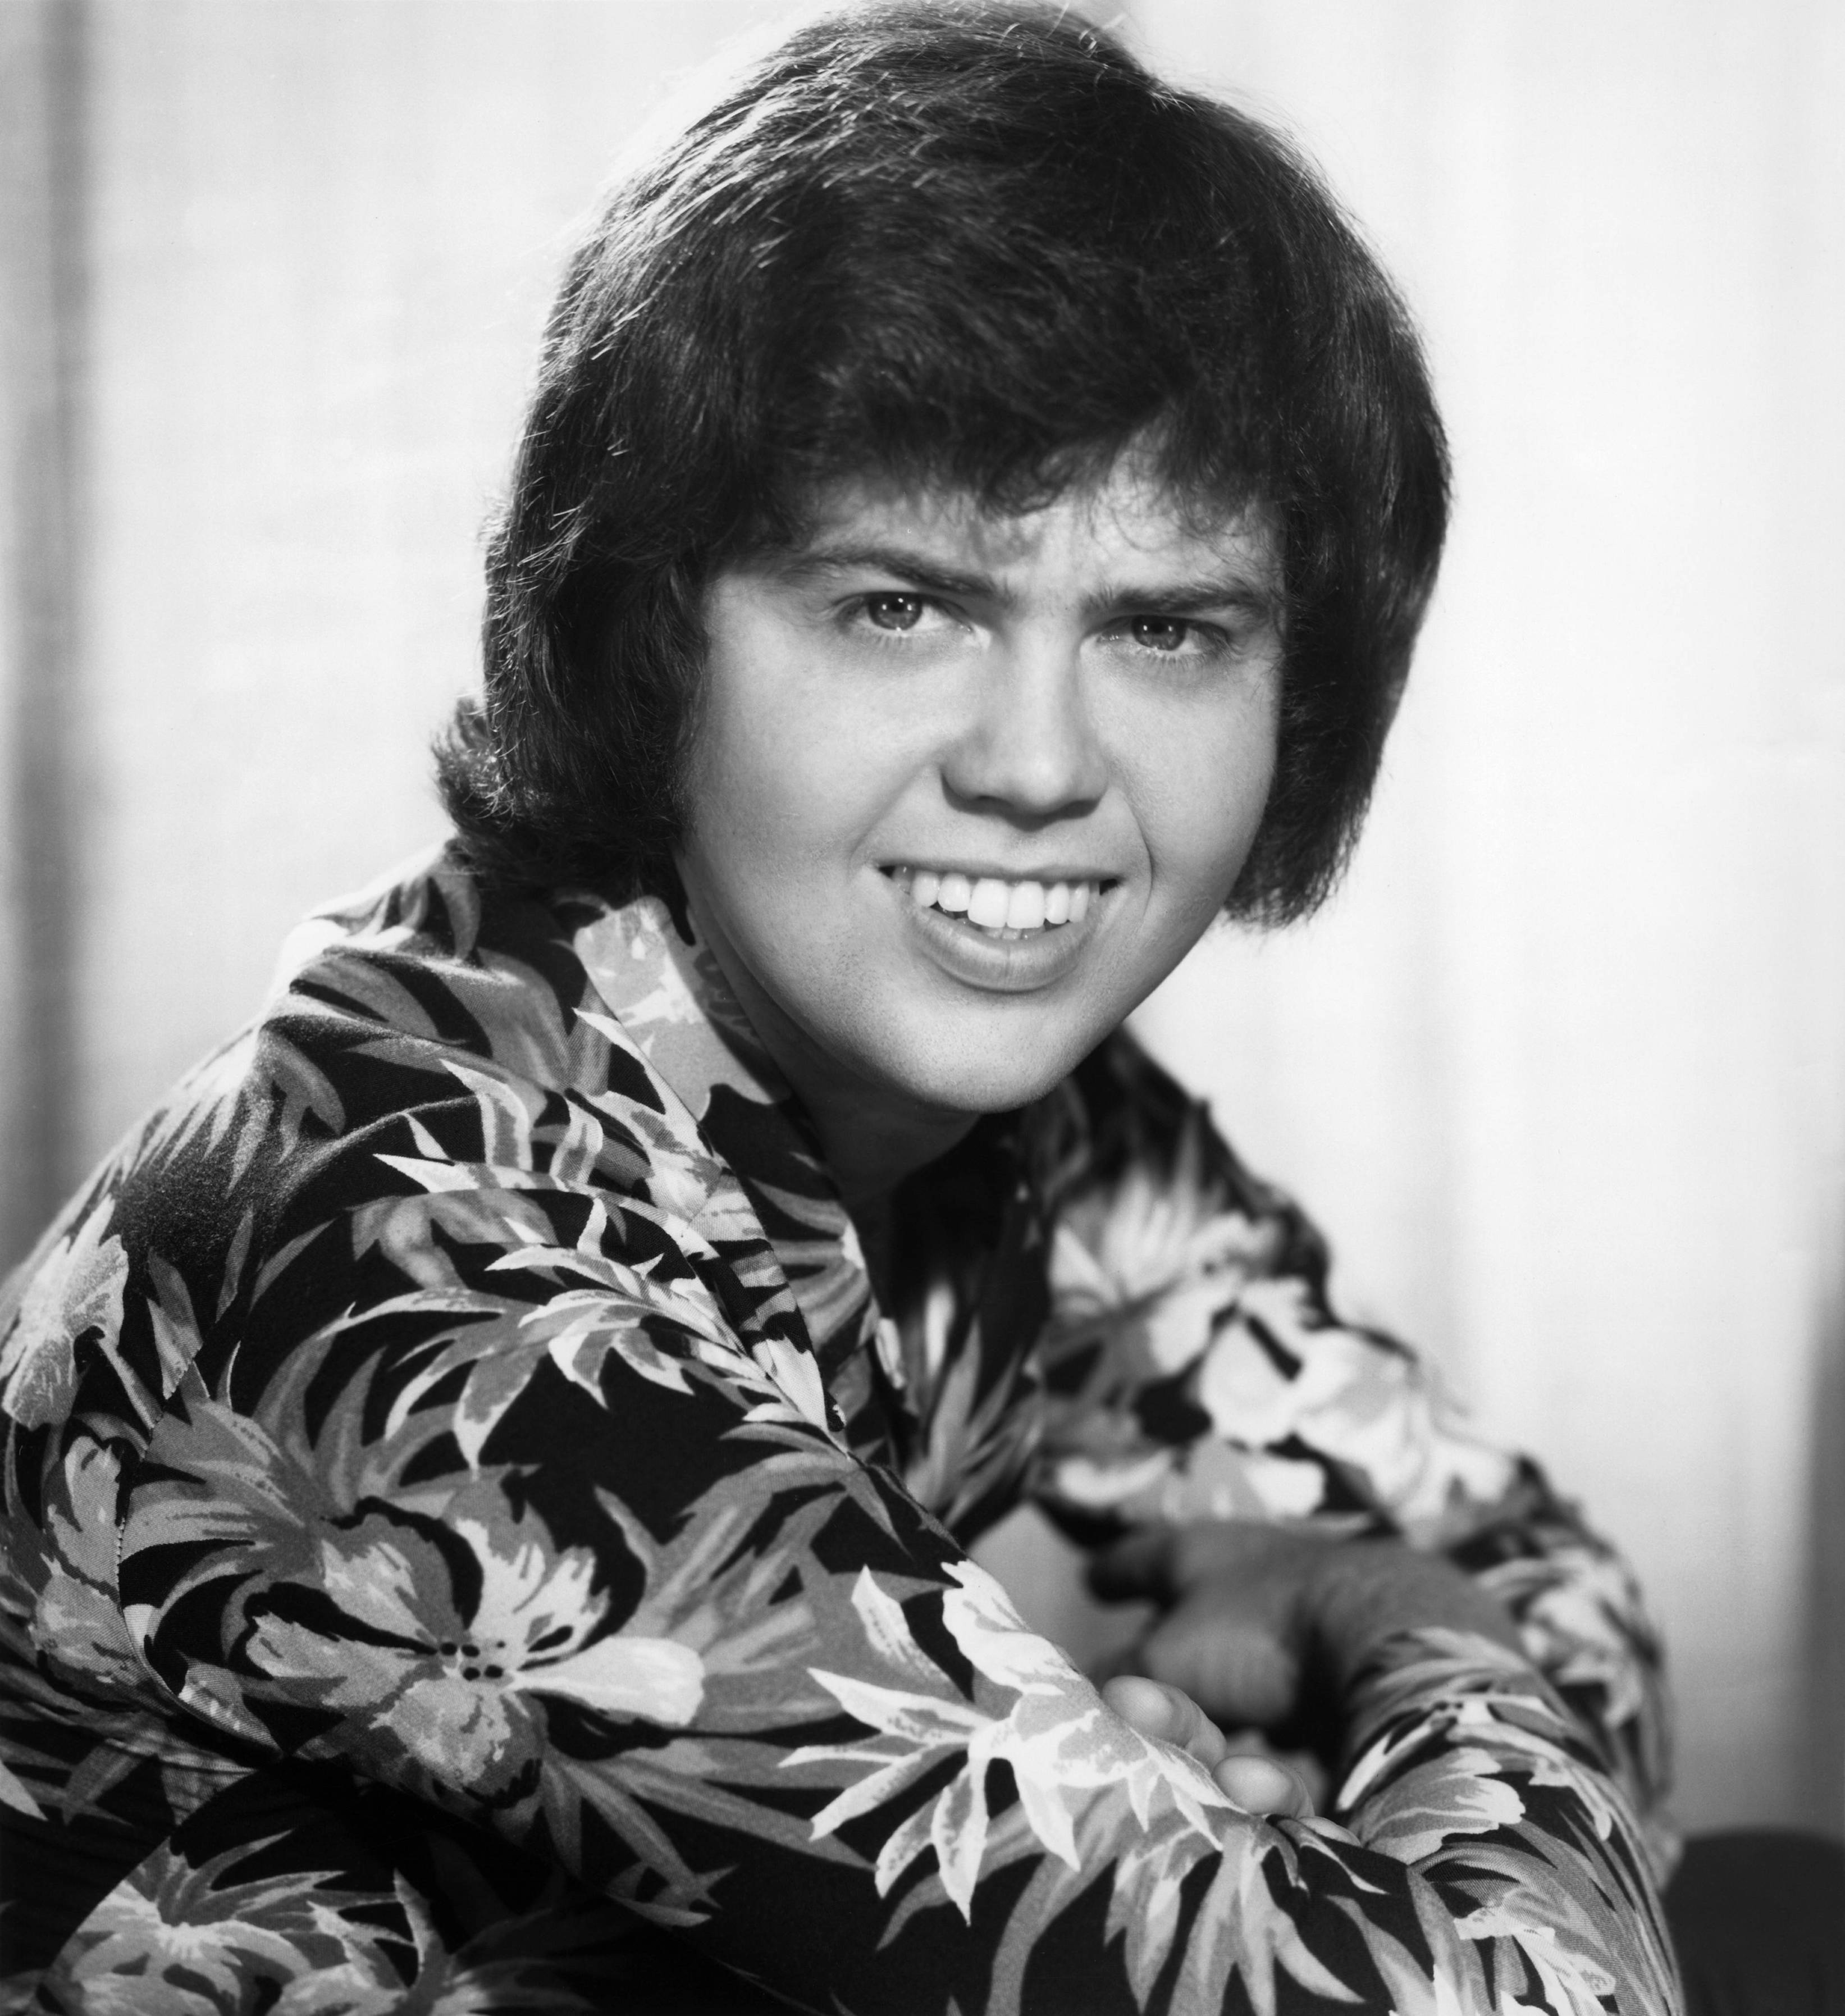 <p>Merrill Osmond is the fifth child in the family. He served as the lead singer and bassist in The Osmonds and The Osmond Brothers. </p>